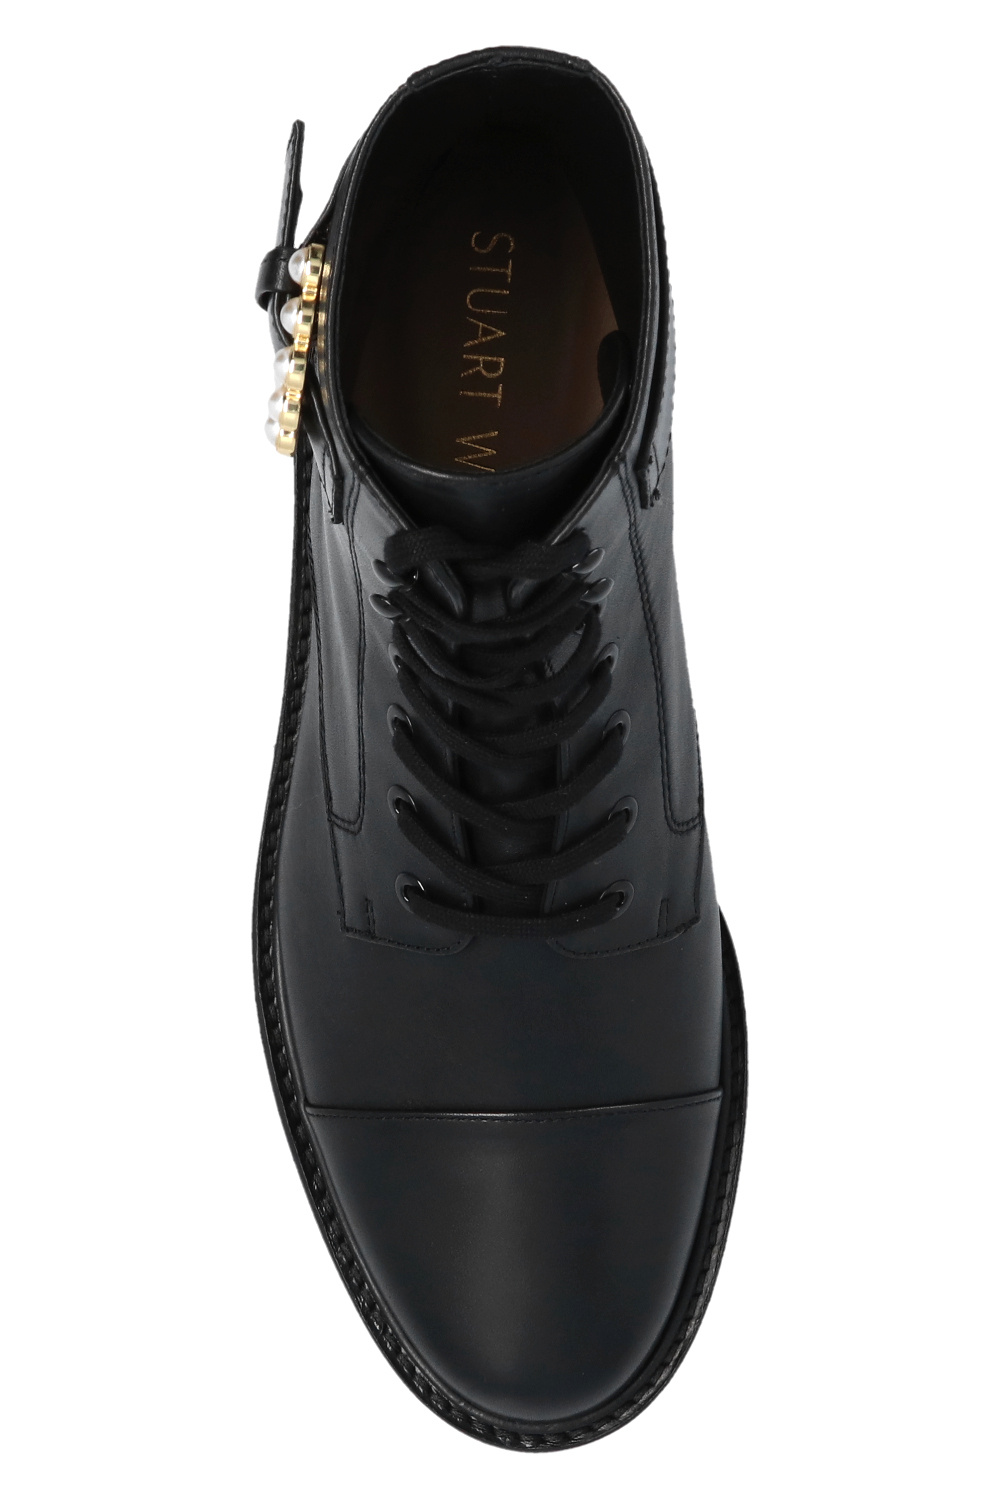 Stuart Weitzman ‘Piper’ lace-up ankle boots